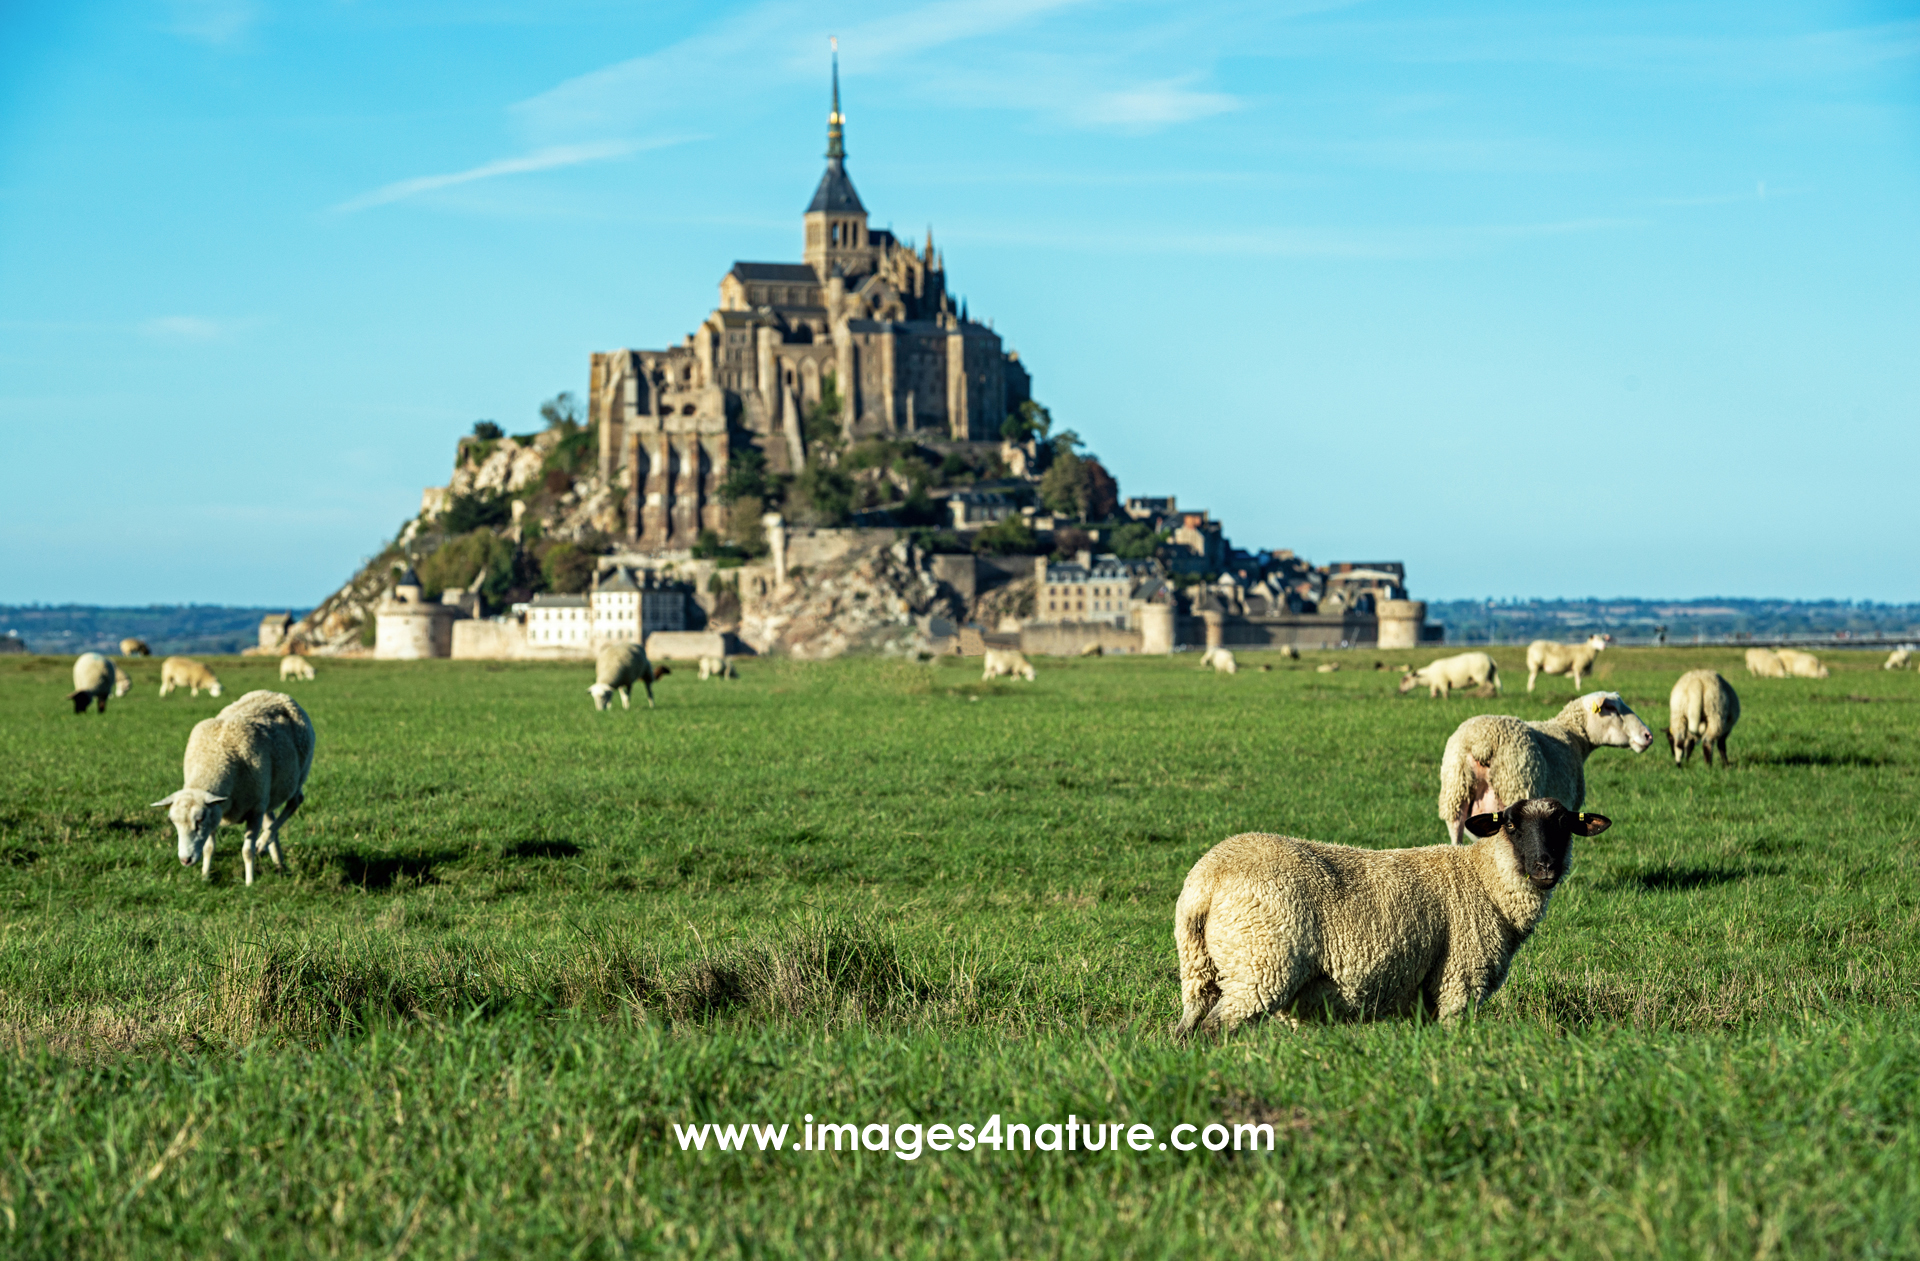 Whilst the Unesco World Heritage Side can get quite busy even during low season, these sheep enjoy their afternoon feast  A very relaxing scenery   France, Mont Saint Michel, October 2022   Image ID 202210 FR 28